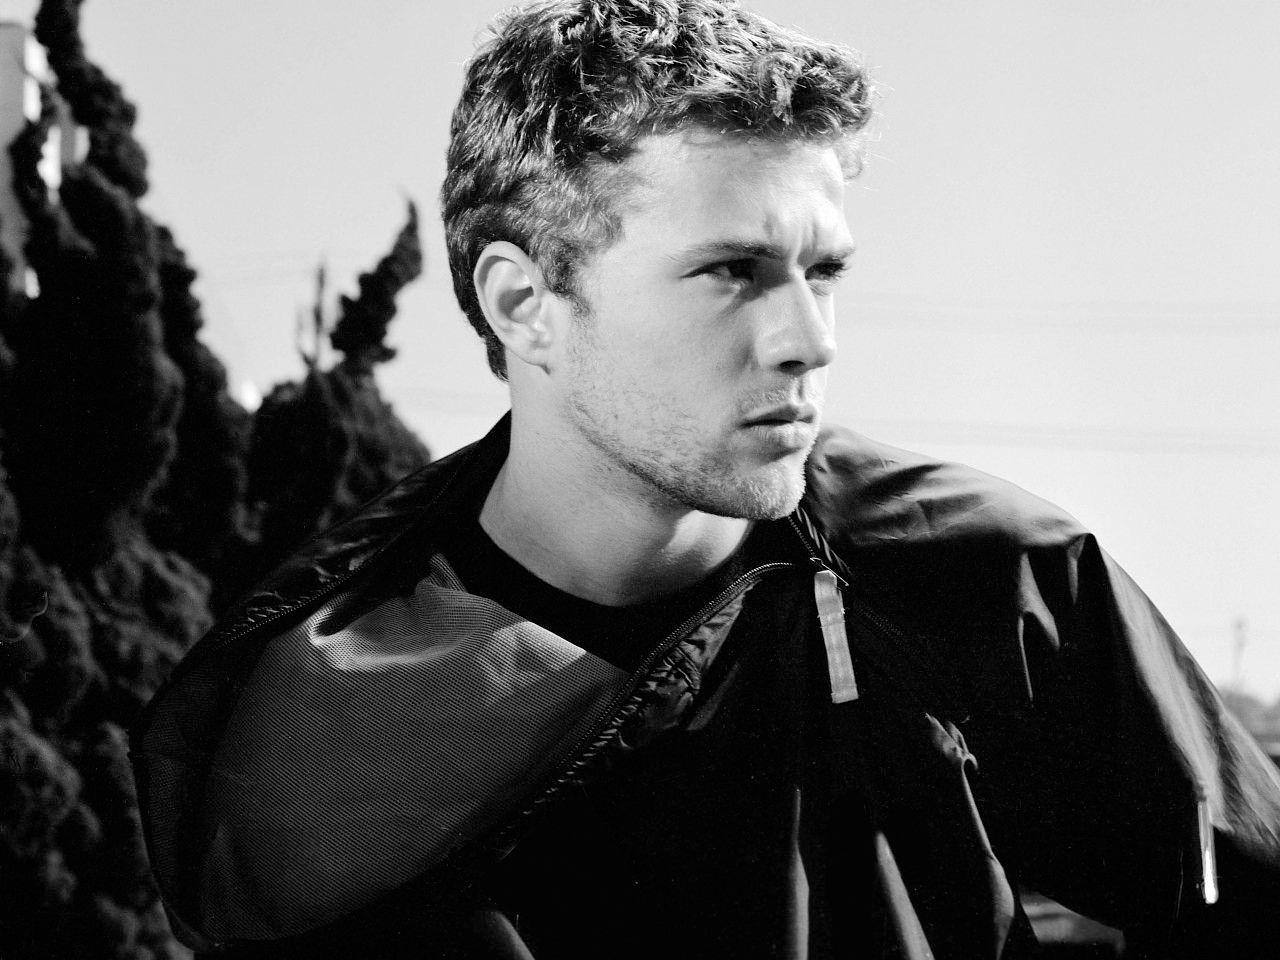 Hollywood Stars: Ryan Phillippe Profile And Pictrues Wallpaper